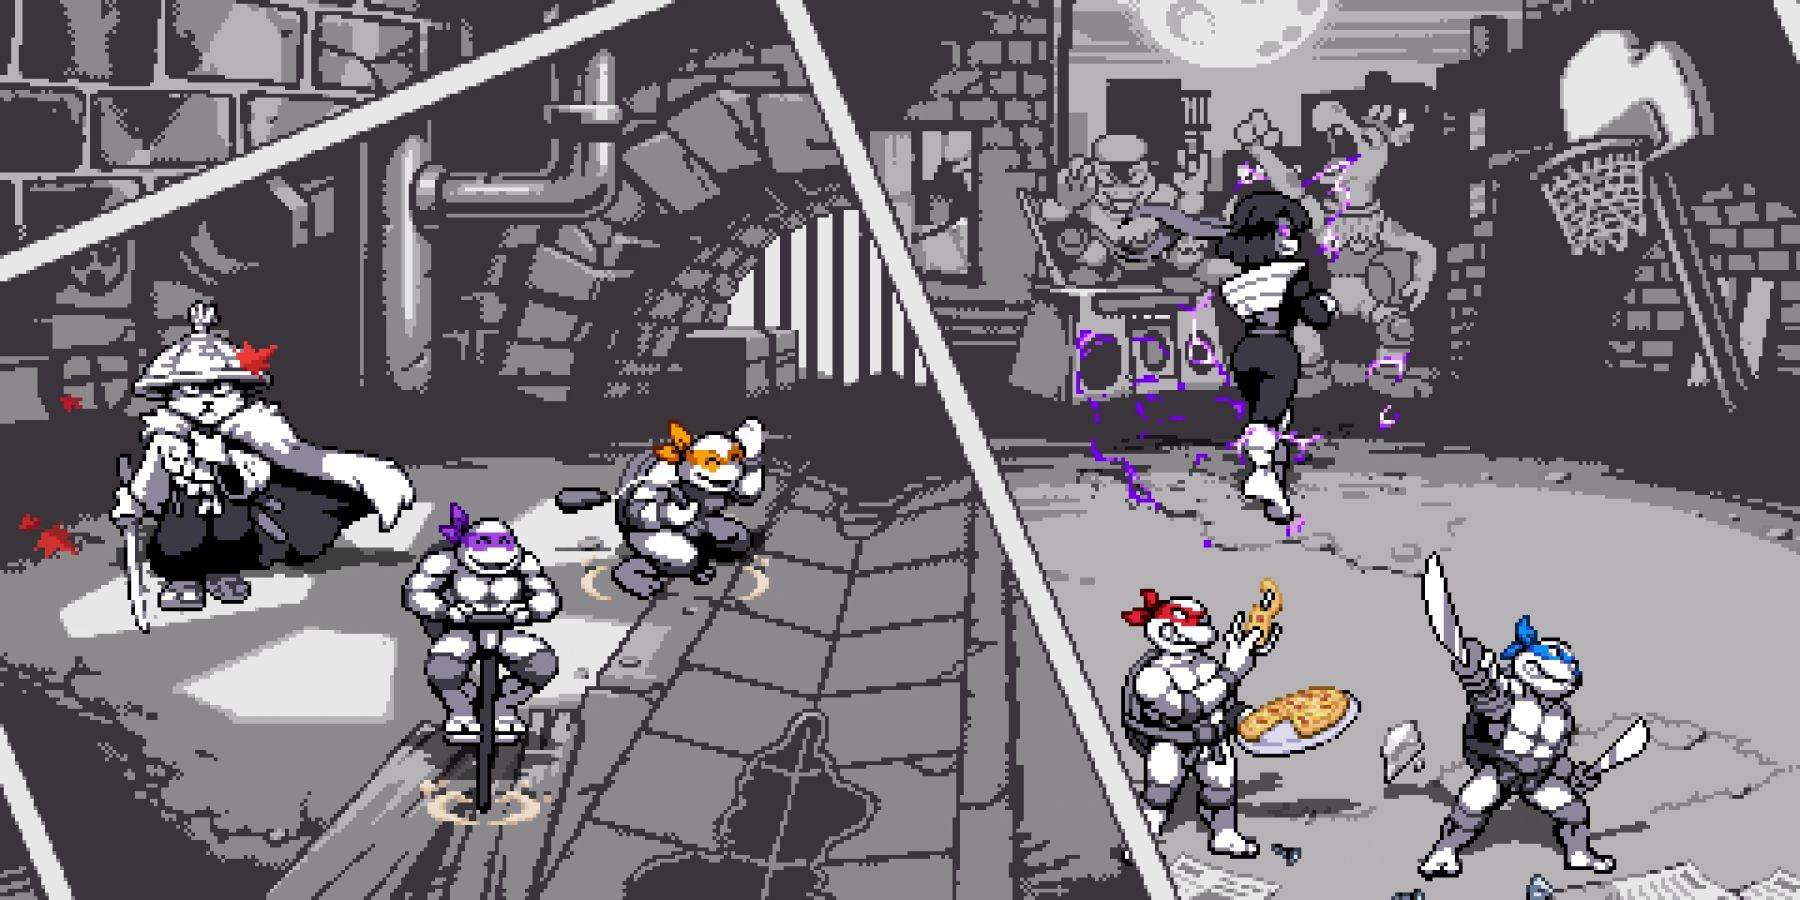 Pixelated TMNT art arranged to look like black and white comic book panels with certain details, like the Turtles' headbands and a pizza, colorized. Two fill a majority of the screen at an angle. On the left, Donatello, Michelangelo, and Usagi are in a sewer. On the right, Leonardo, Raphael, and Karai are on a basketball court.